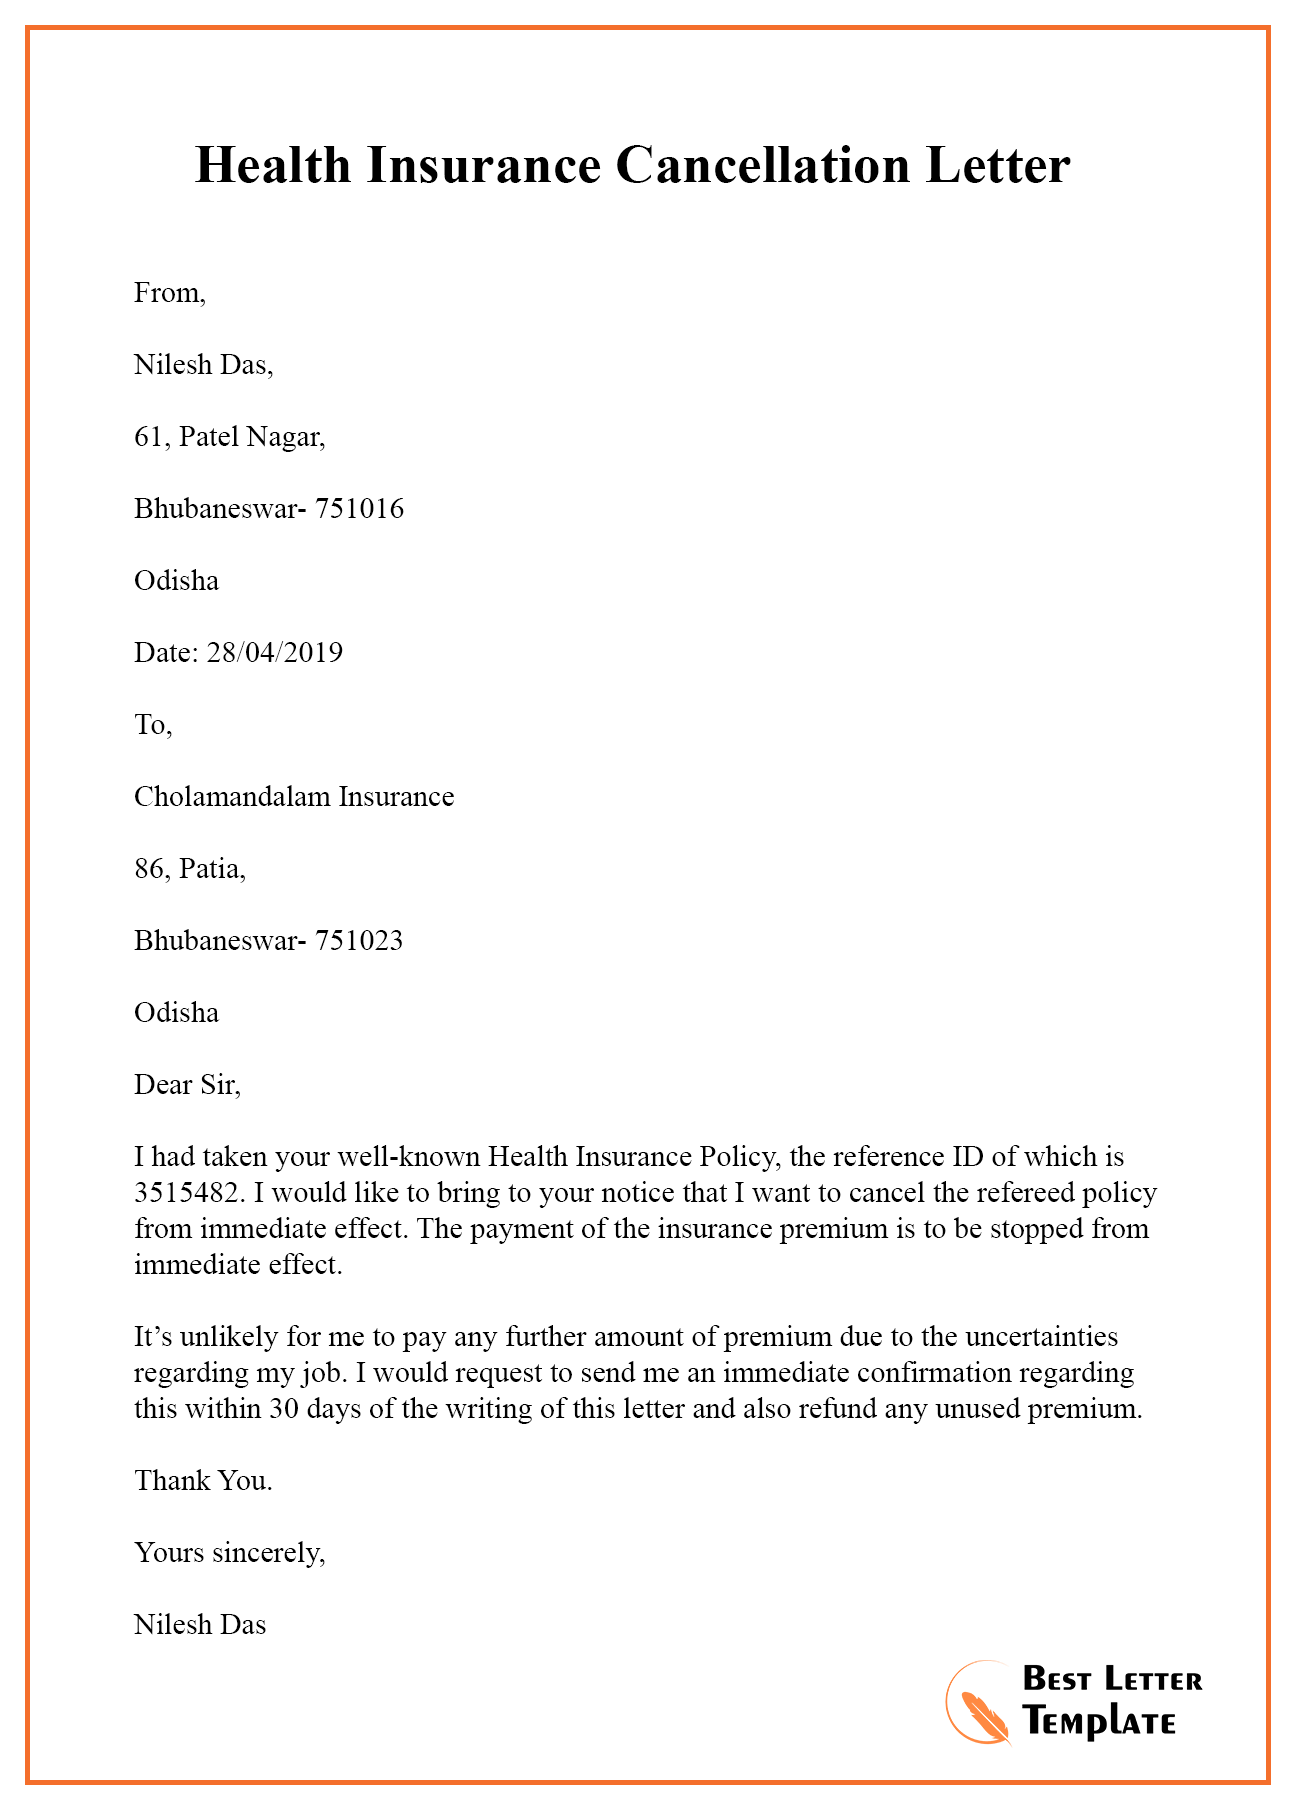 sample-cancellation-letter-template